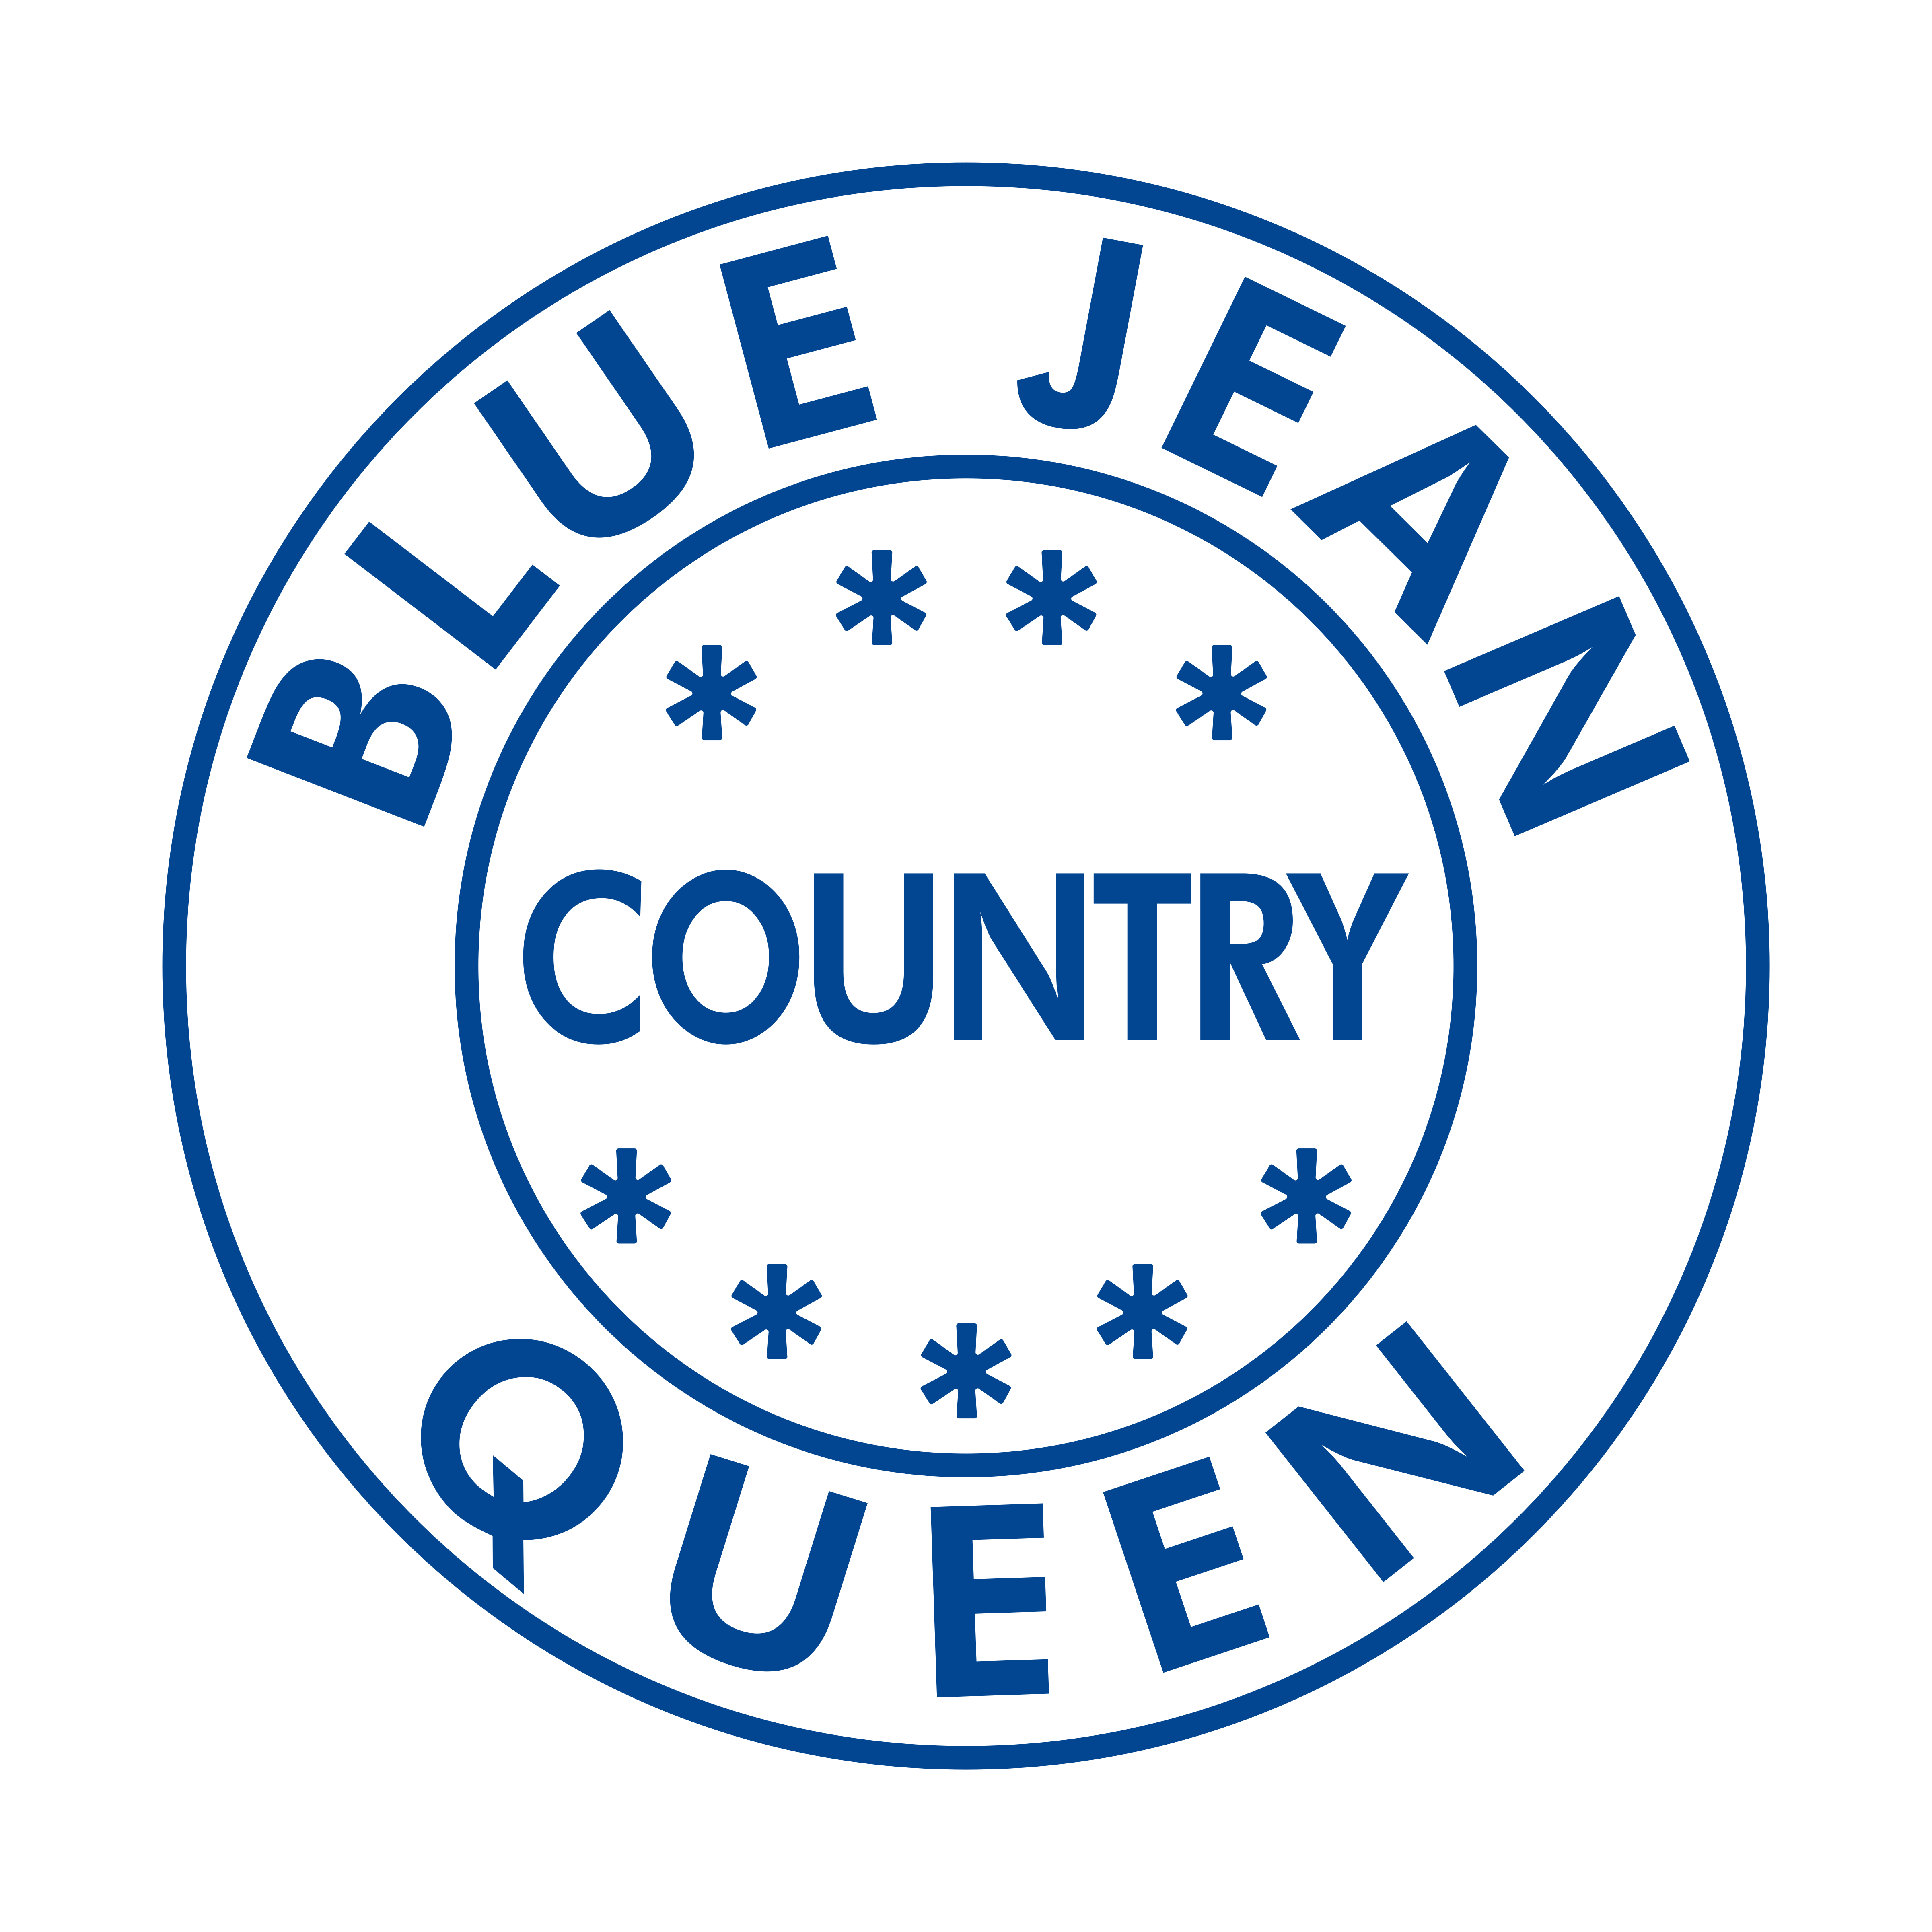 Blue Jean Country Queen Festival